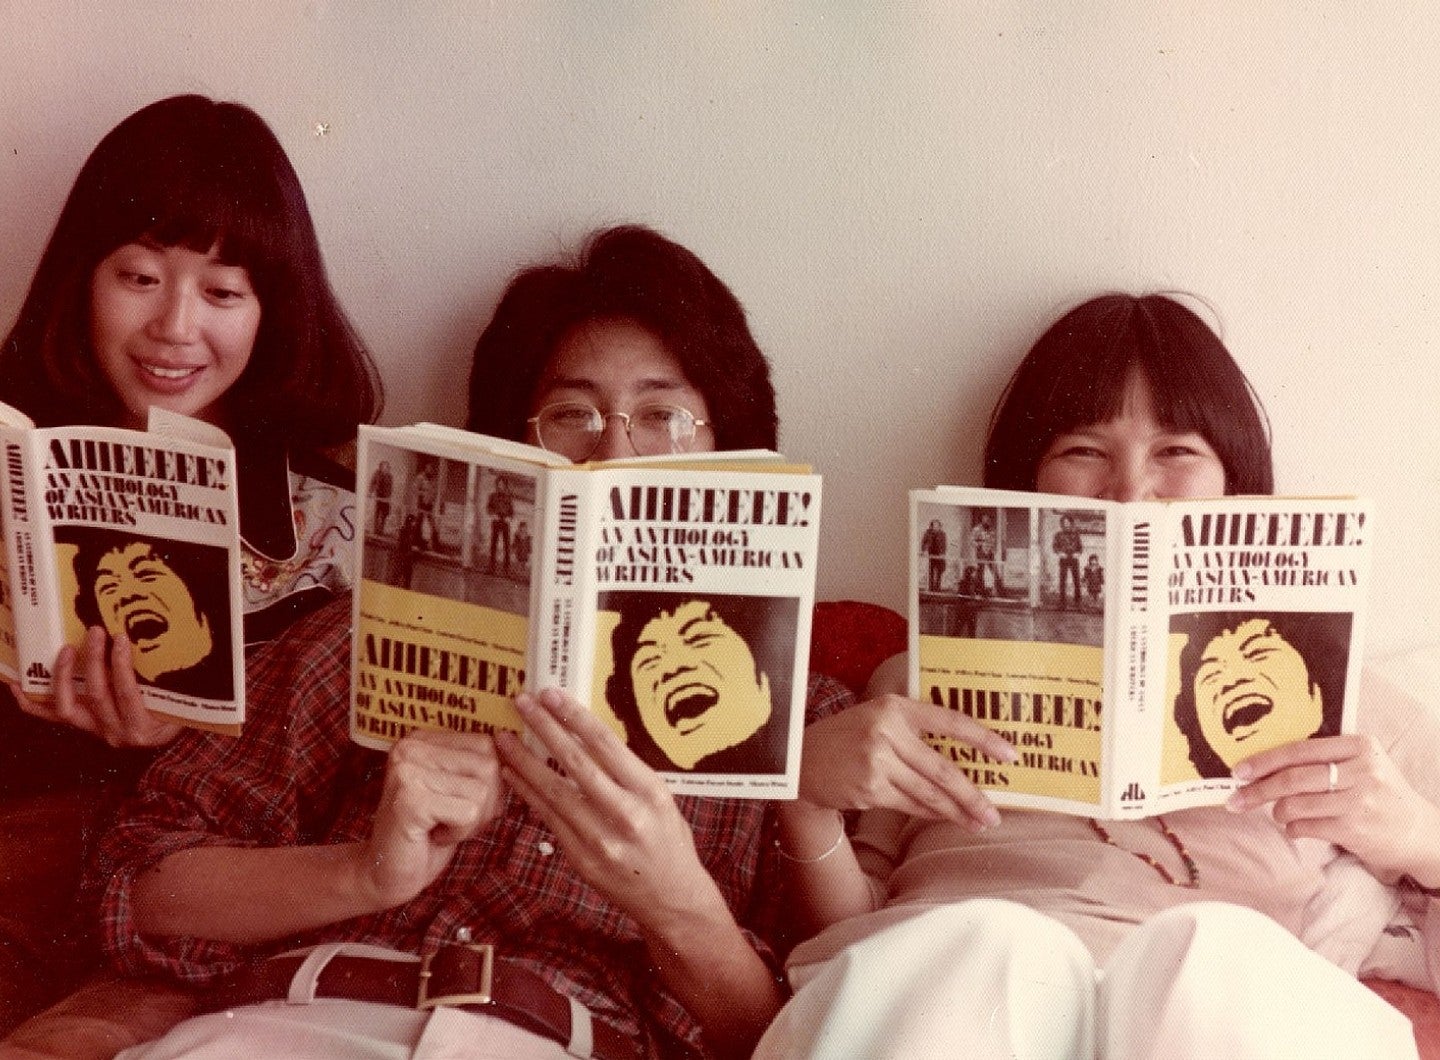 people reading book on asian-american literature